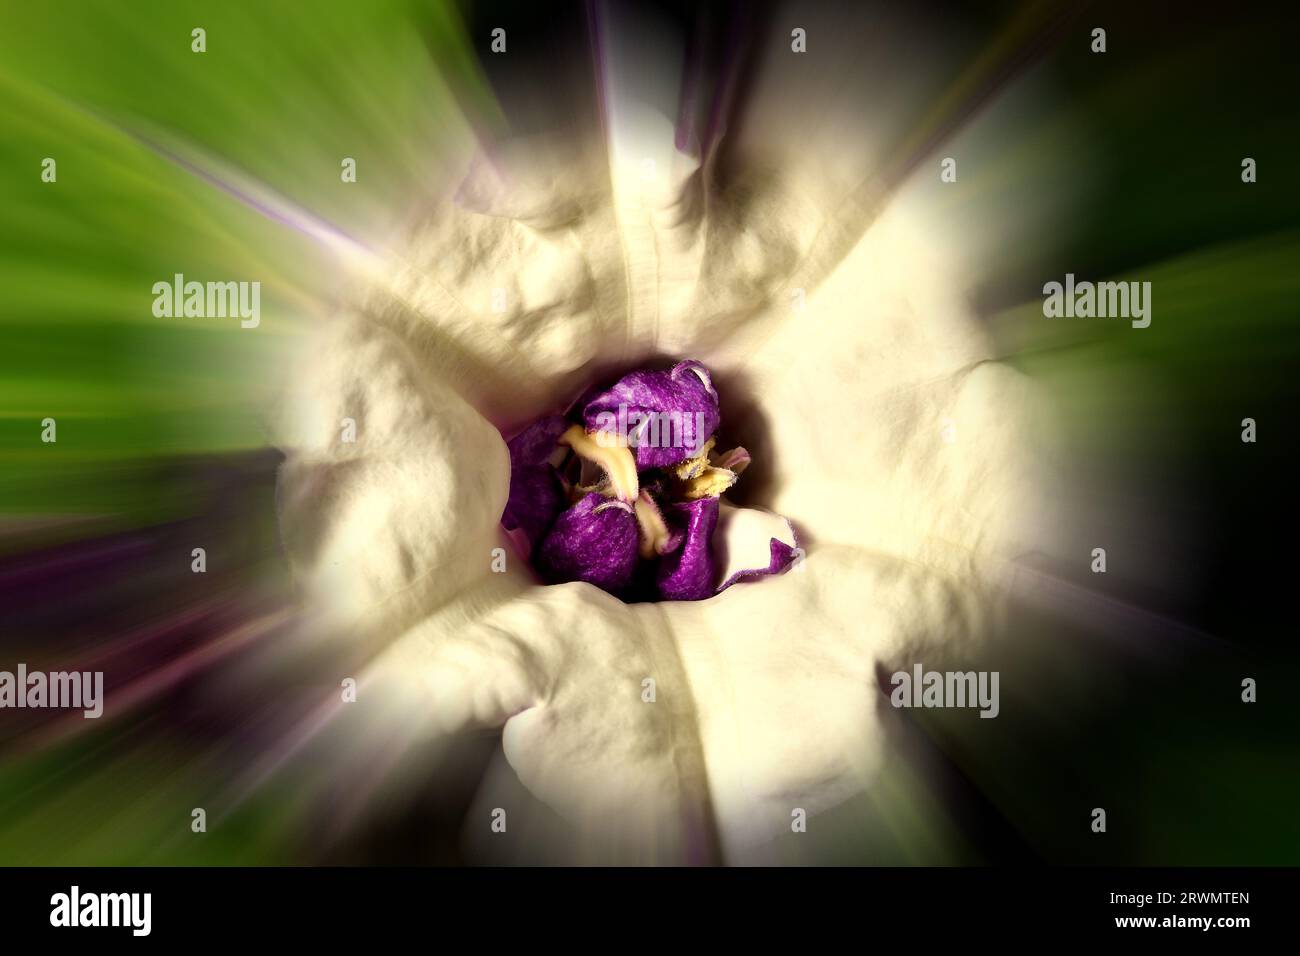 thorn apple with violet and white flower, blurred with sharp center Stock Photo